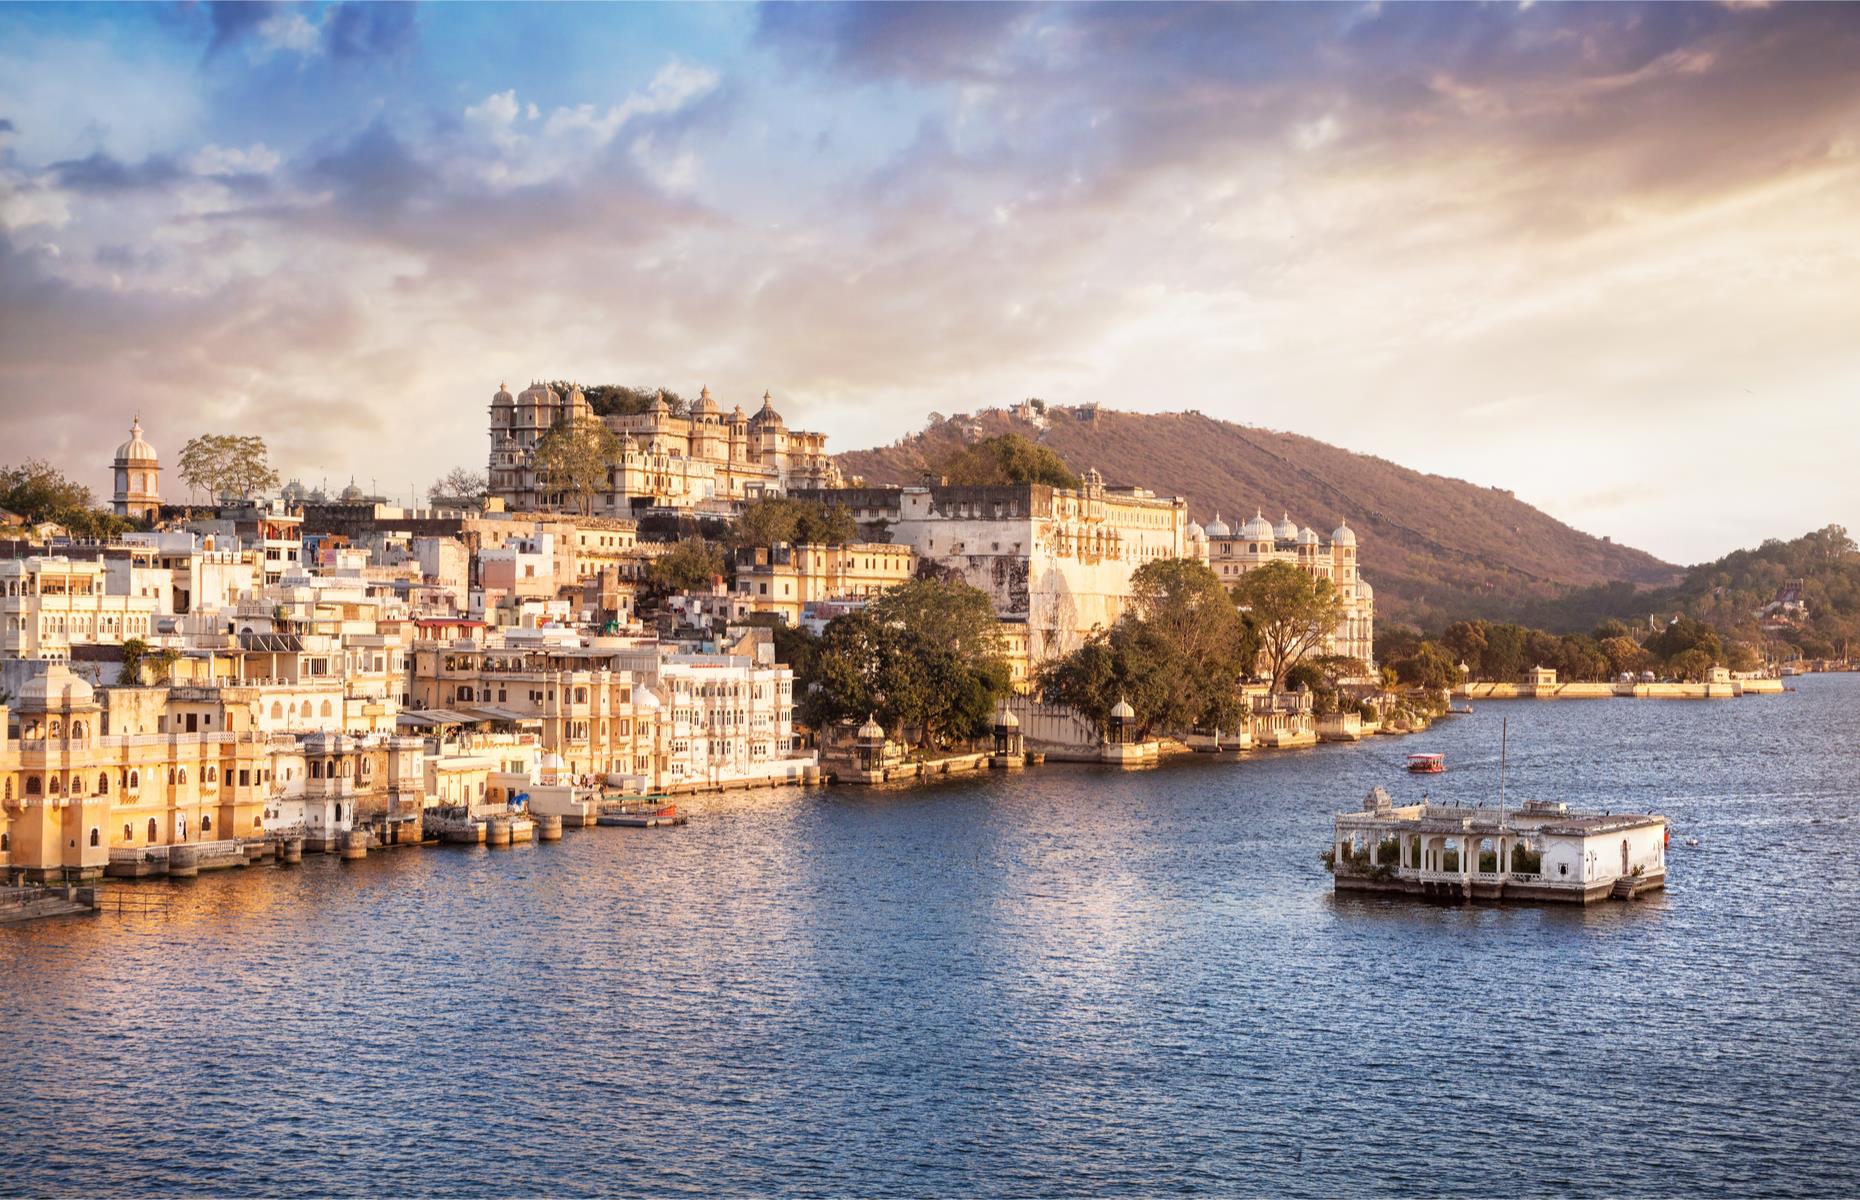 <p>Known as the Venice of the East, Udaipur is arguably India's most romantic city. Take a boat ride around Lake Pichola to admire the white City Palace, once home to the Maharani of Udaipur, and marvel at the Taj Lake Palace which seems to float on the water.</p>  <p>This marble beauty is now an extravagant hotel.</p>